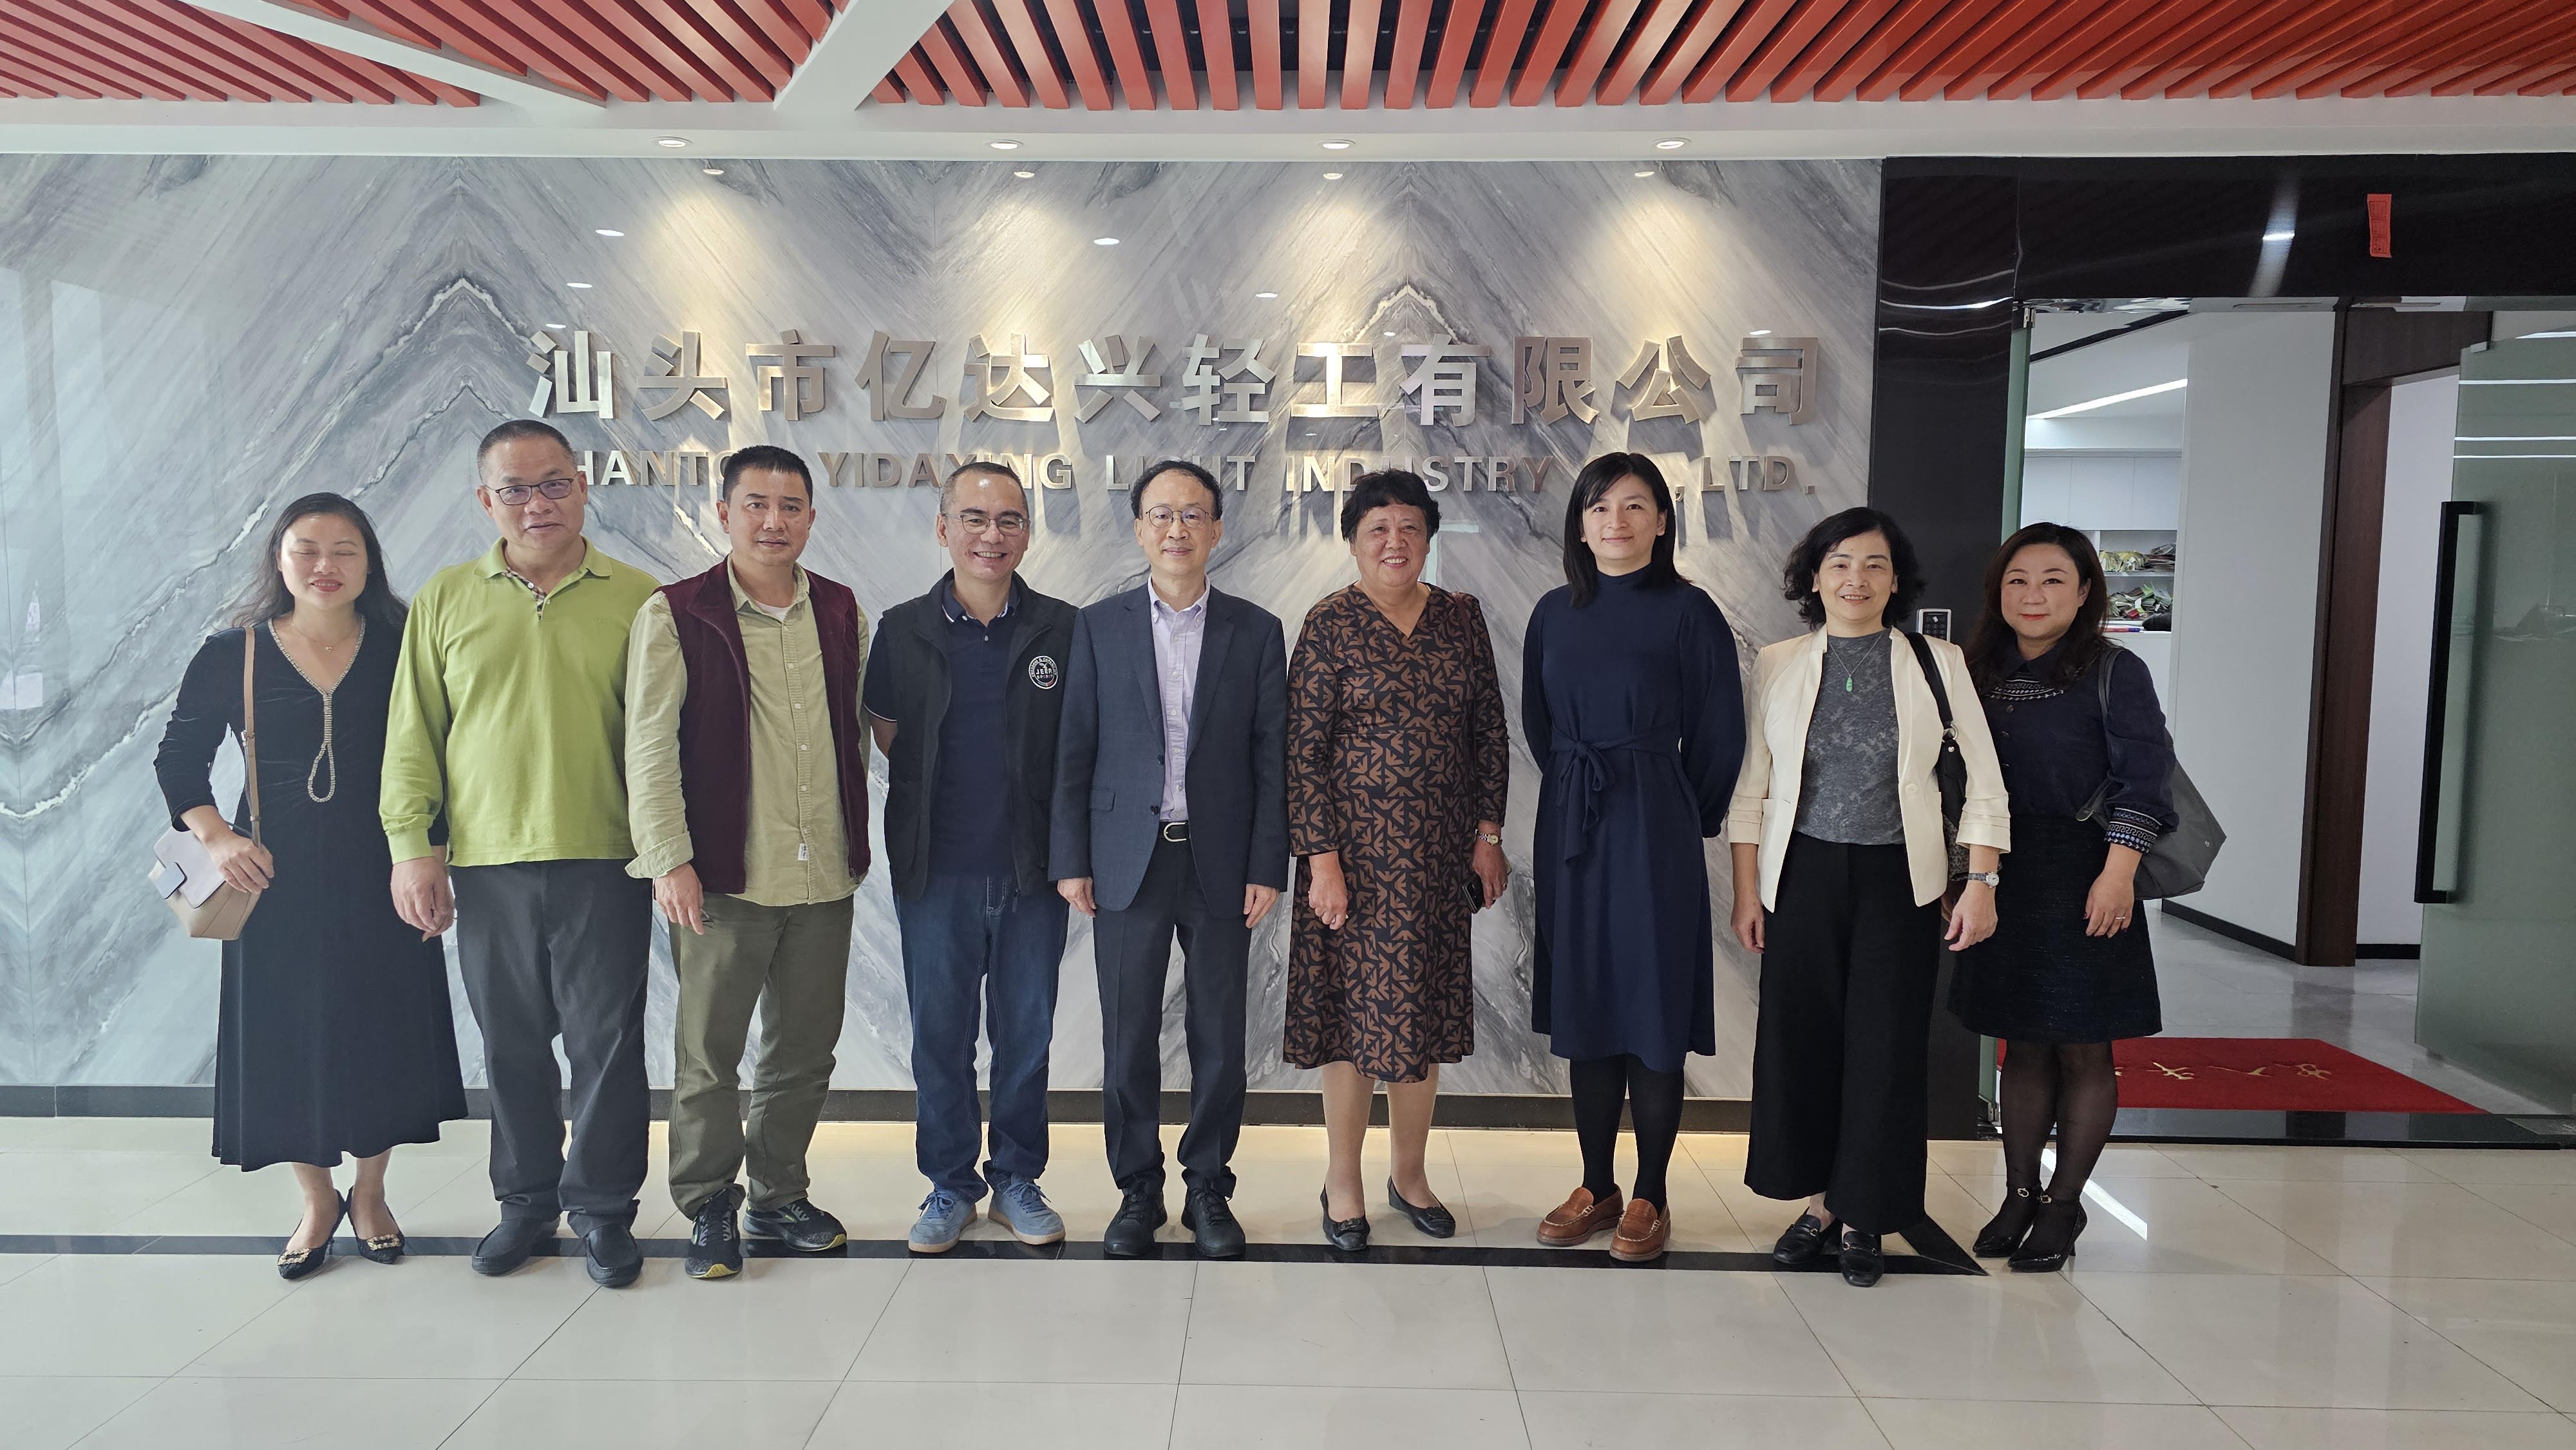 Shantou-Business-Association-Leaders-Conduct-Inspection-and-Tour-at-Yidaxing